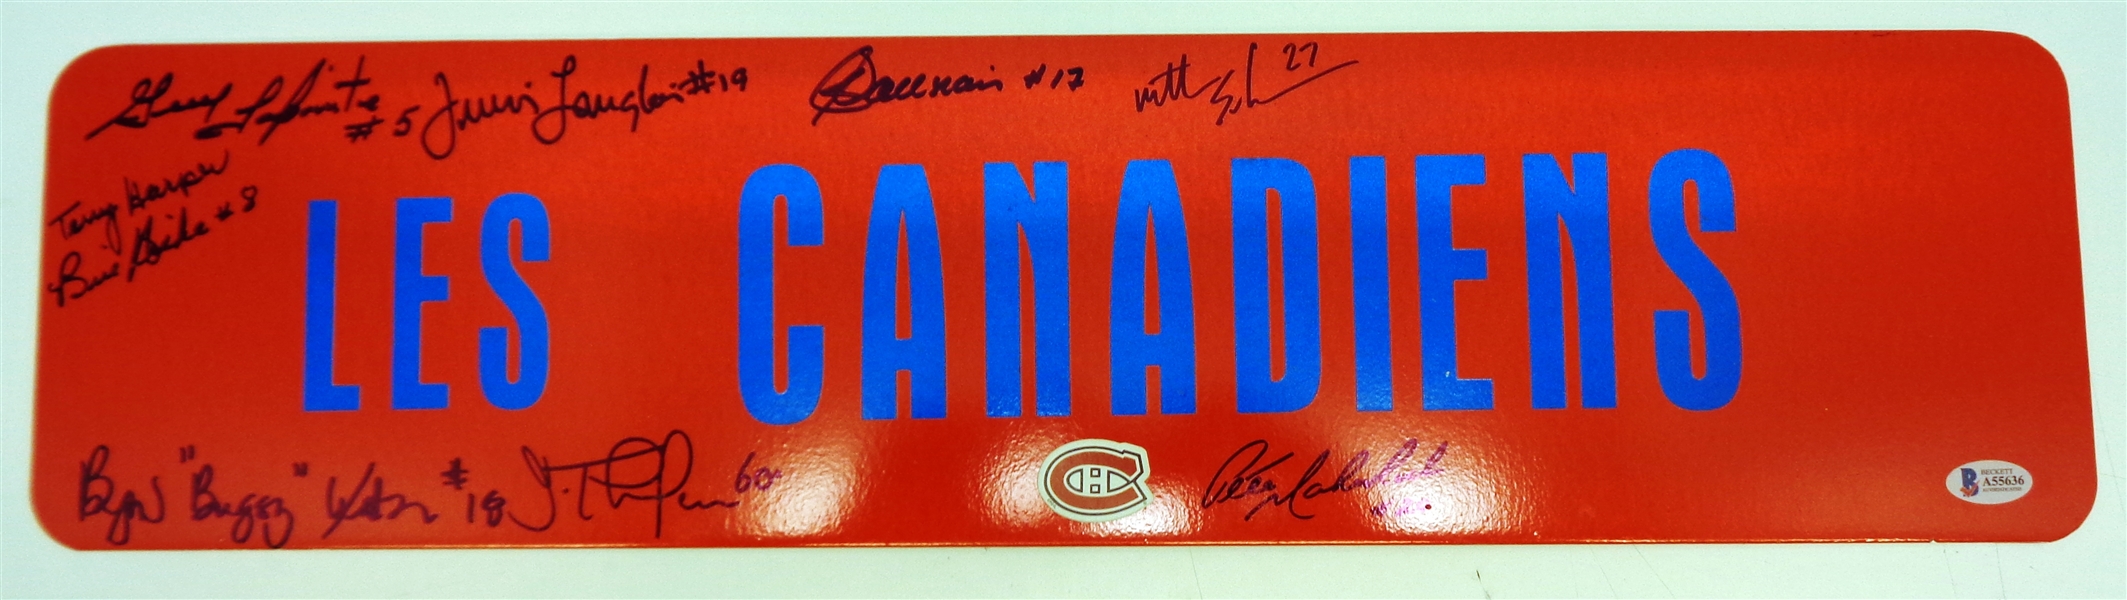 Montreal Canadiens 6x24 Metal Sign Autographed by 9